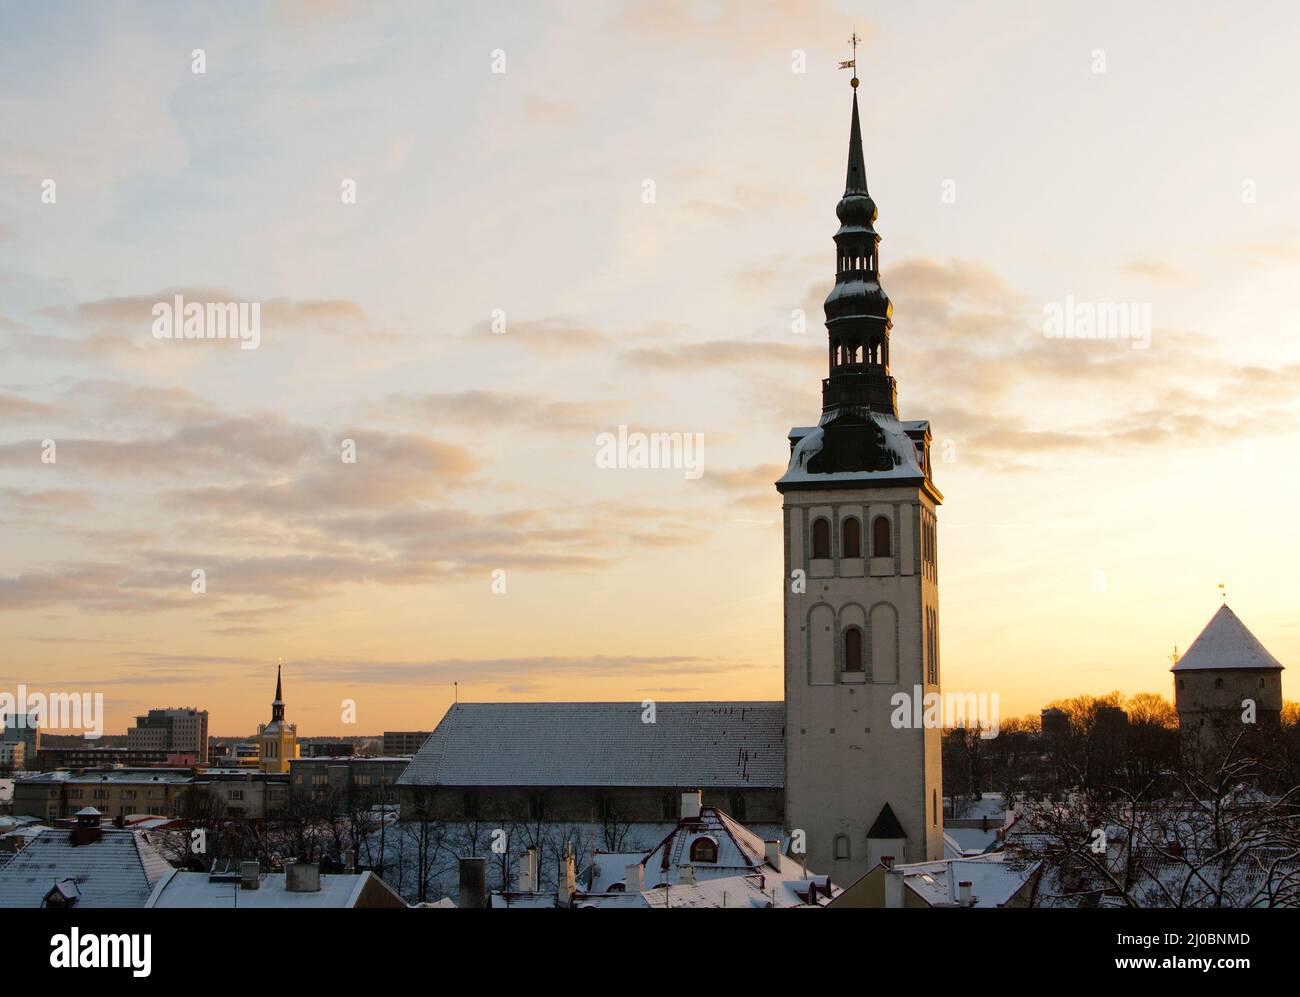 St. Nicholas Concert Hall and Museum in New Year's Eve, Evening Tallinn, Estonia. Stock Photo